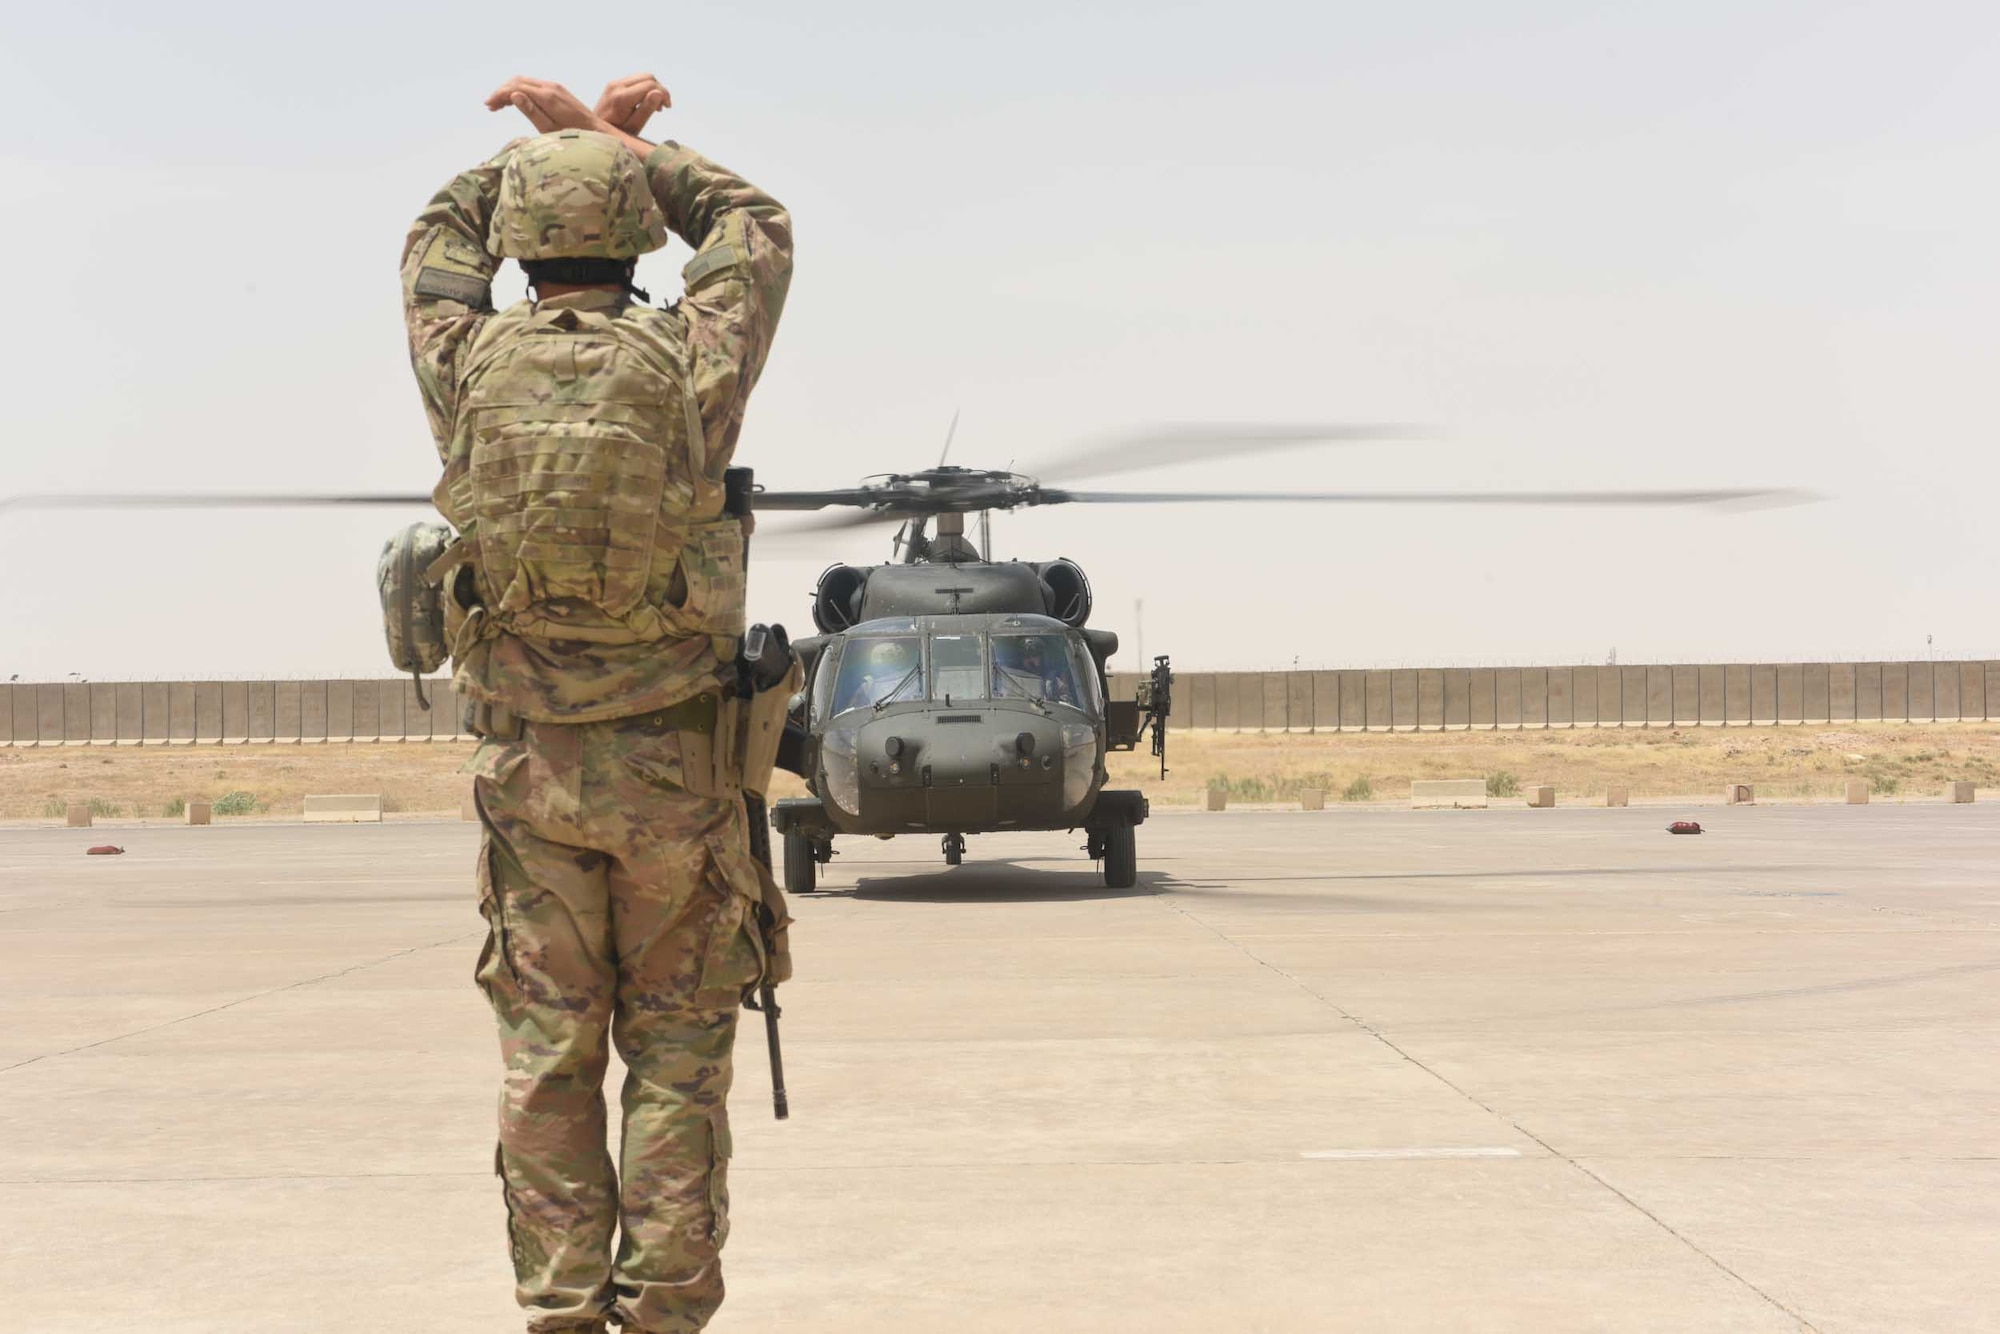 U.S. Air Force Tech. Sgt. Joseph Tenebruso, the expeditionary maintenance flight chief deployed in support of Combined Joint Task Force – Operation Inherent Resolve and assigned to the 370th Air Expeditionary Advisory Group, Detachment 1, marshals in an UH-60 Black Hawk helicopter at Qayyarah West Airfield, Iraq, July 2, 2017. The expeditionary maintenance liaisons marshal incoming aircraft at Qayyarah West to maintain an efficient parking plan at the logistical hub for the Mosul offensive. CJTF-OIR is the global Coalition to defeat ISIS in Iraq and Syria. (U.S. Air Force photo by Tech. Sgt. Jonathan Hehnly)